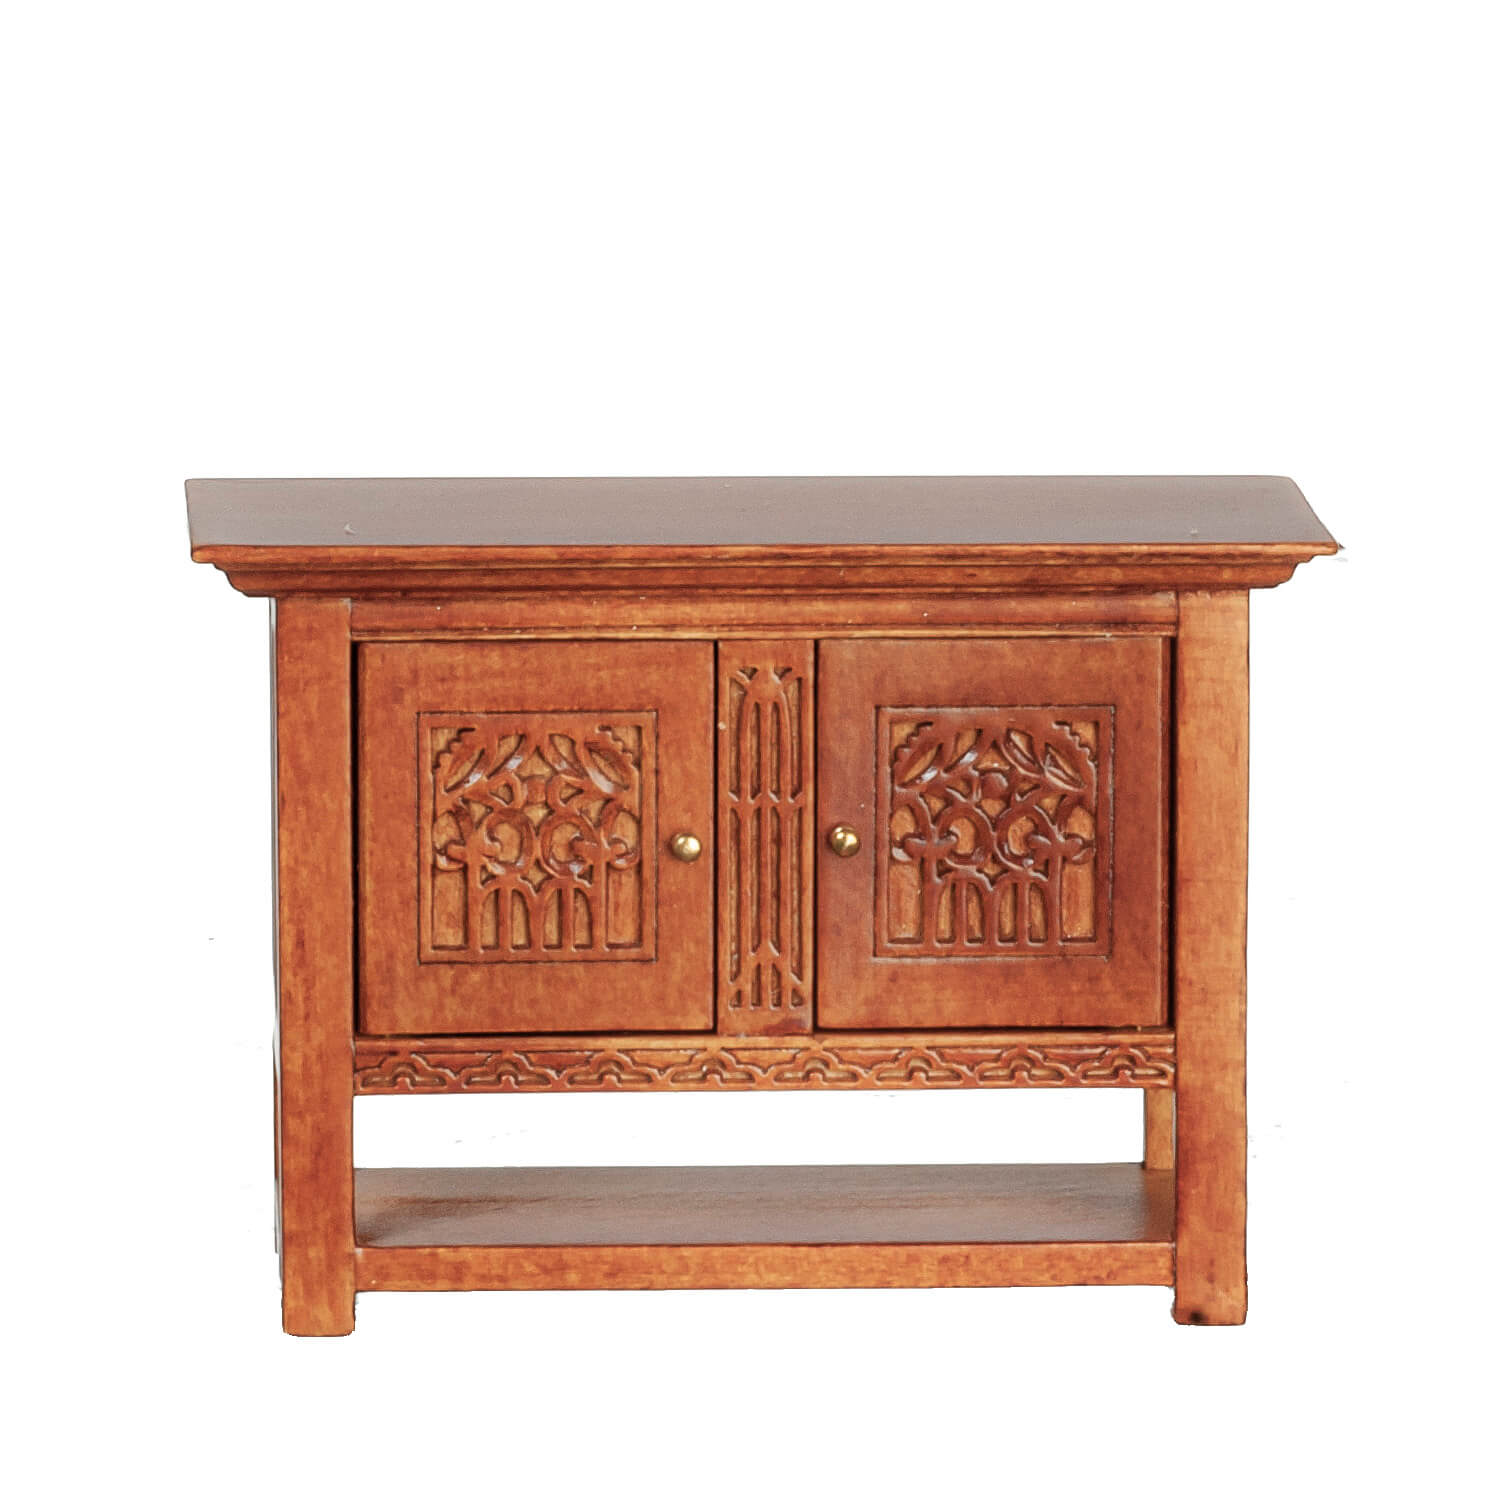 Small Jacobean Carved Credenza c1603 - Walnut